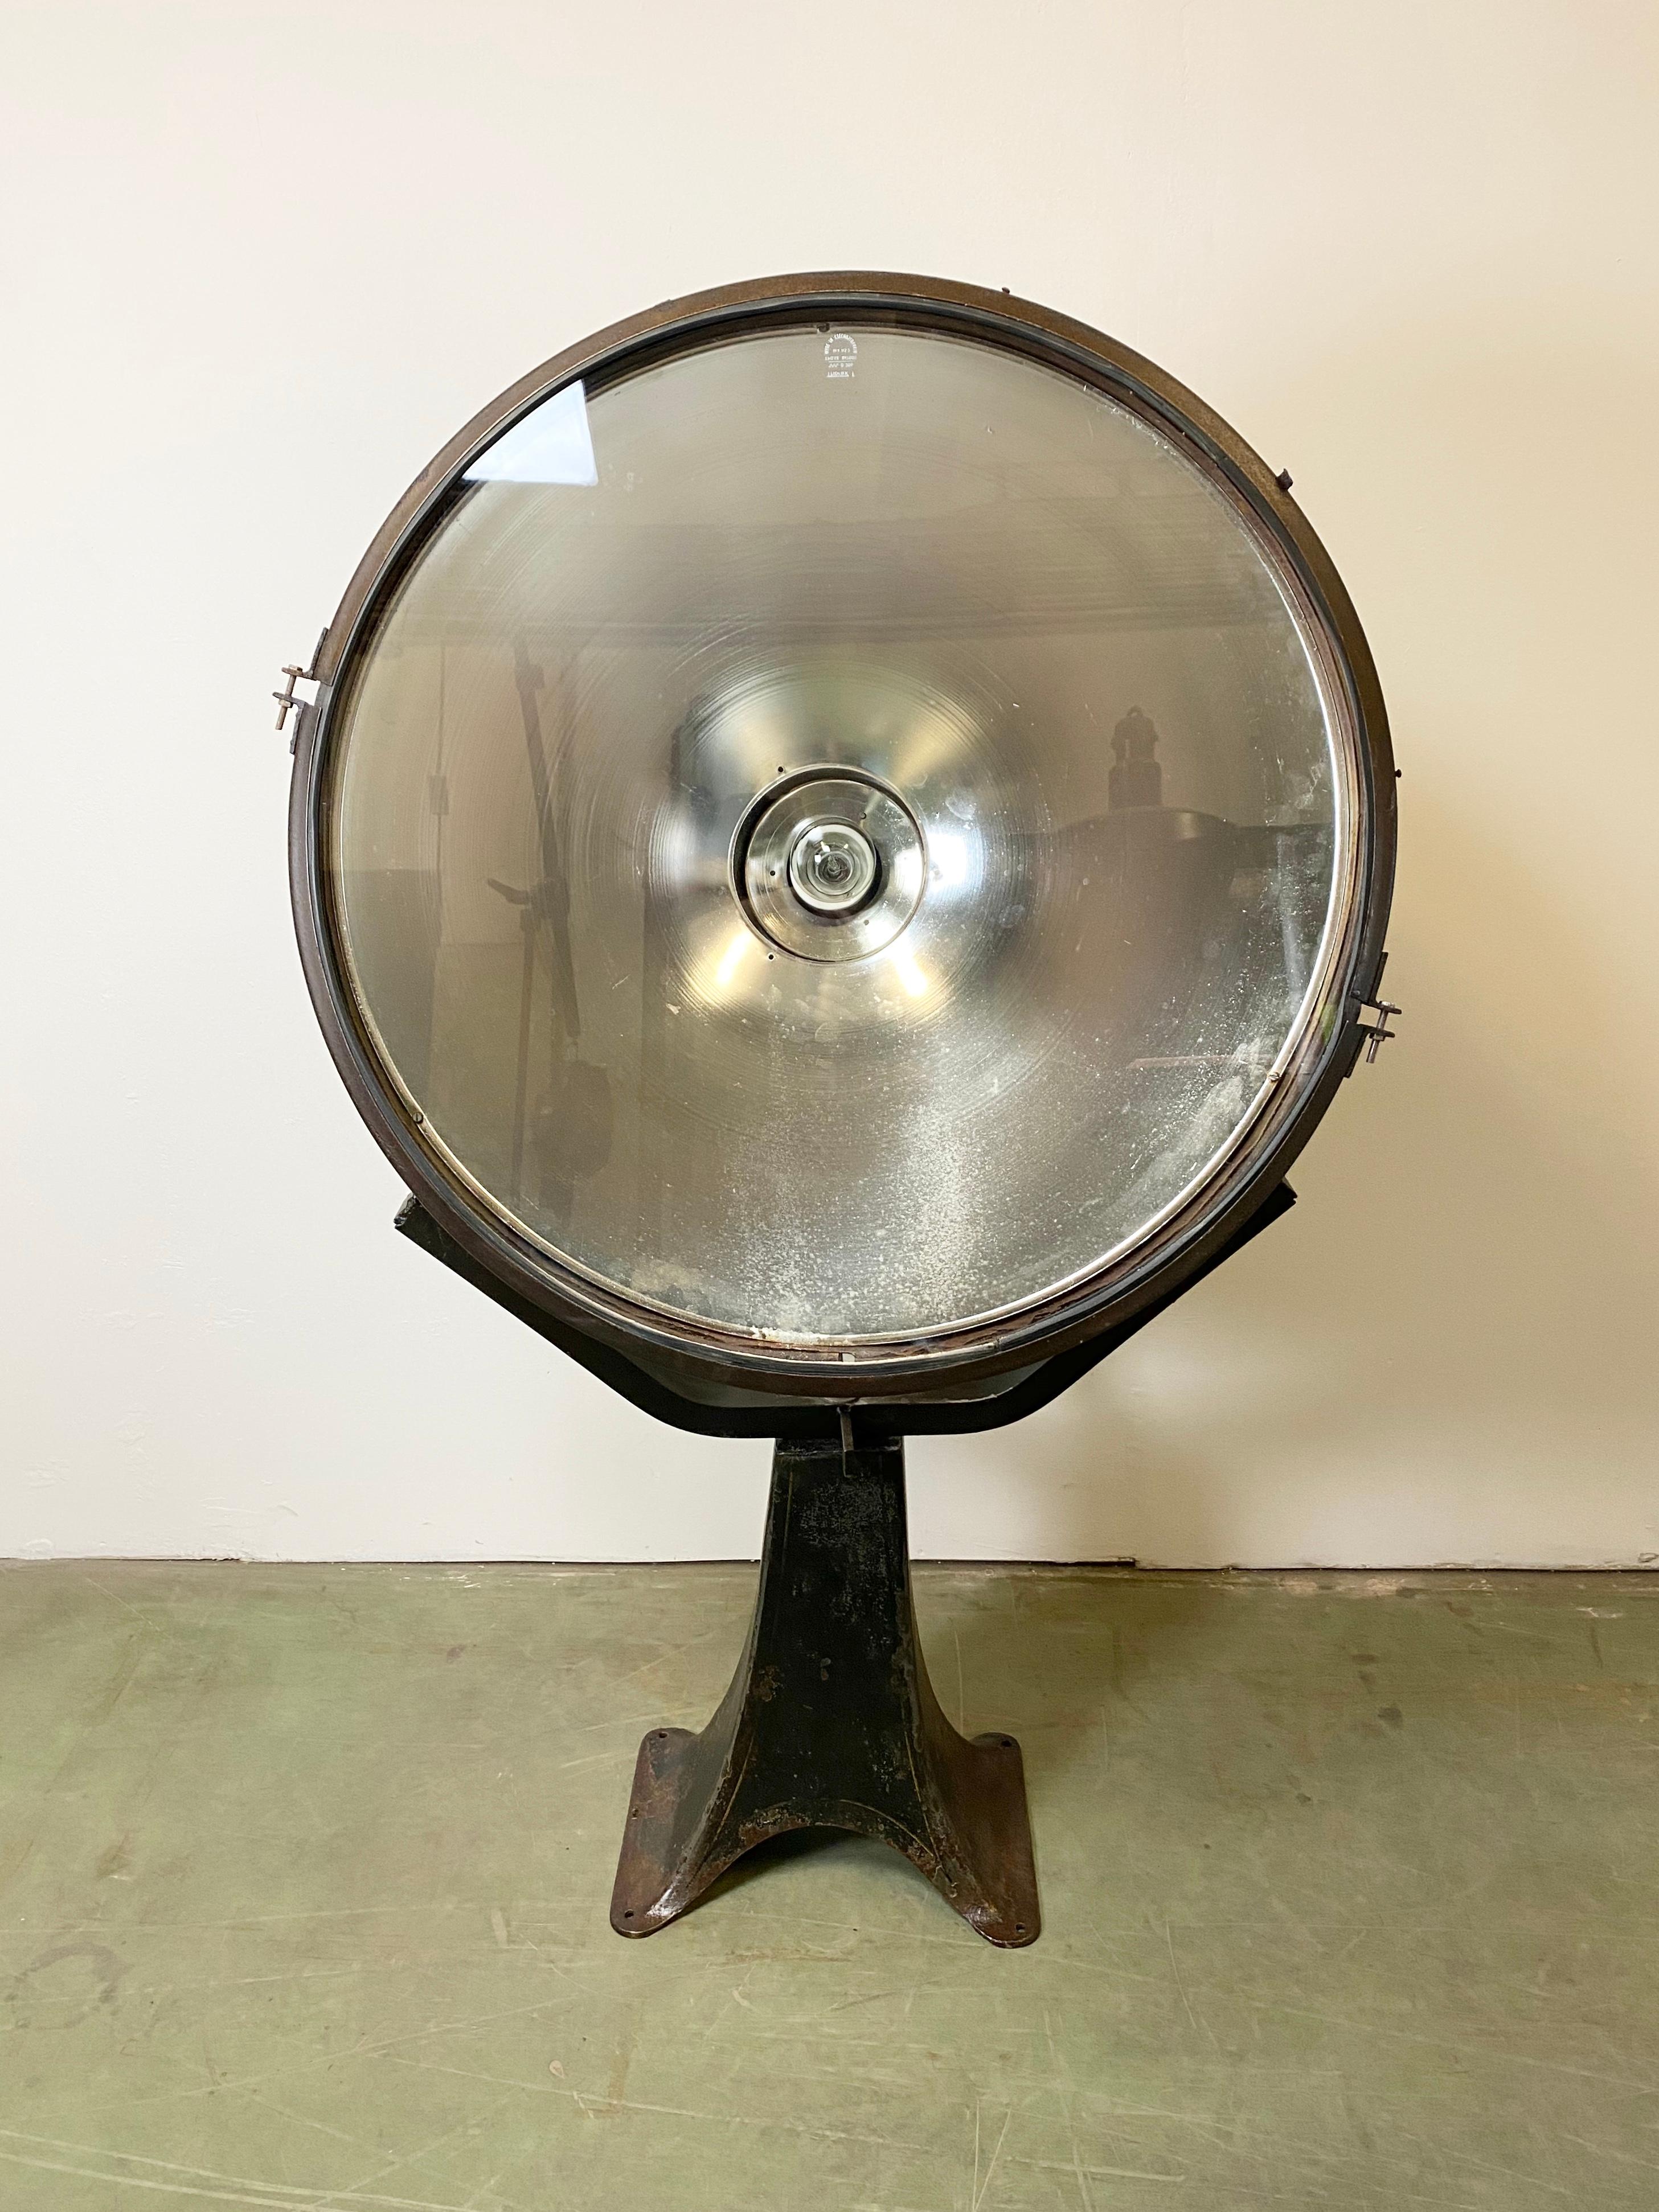 Very large industrial spotlight mounted on a solid iron stand. Made in former Czechoslovakia during the 1950s. It was used in factories and airport runways. It features a metal body, clear glass cover, new porcelain socket for E 27 lightbulbs and